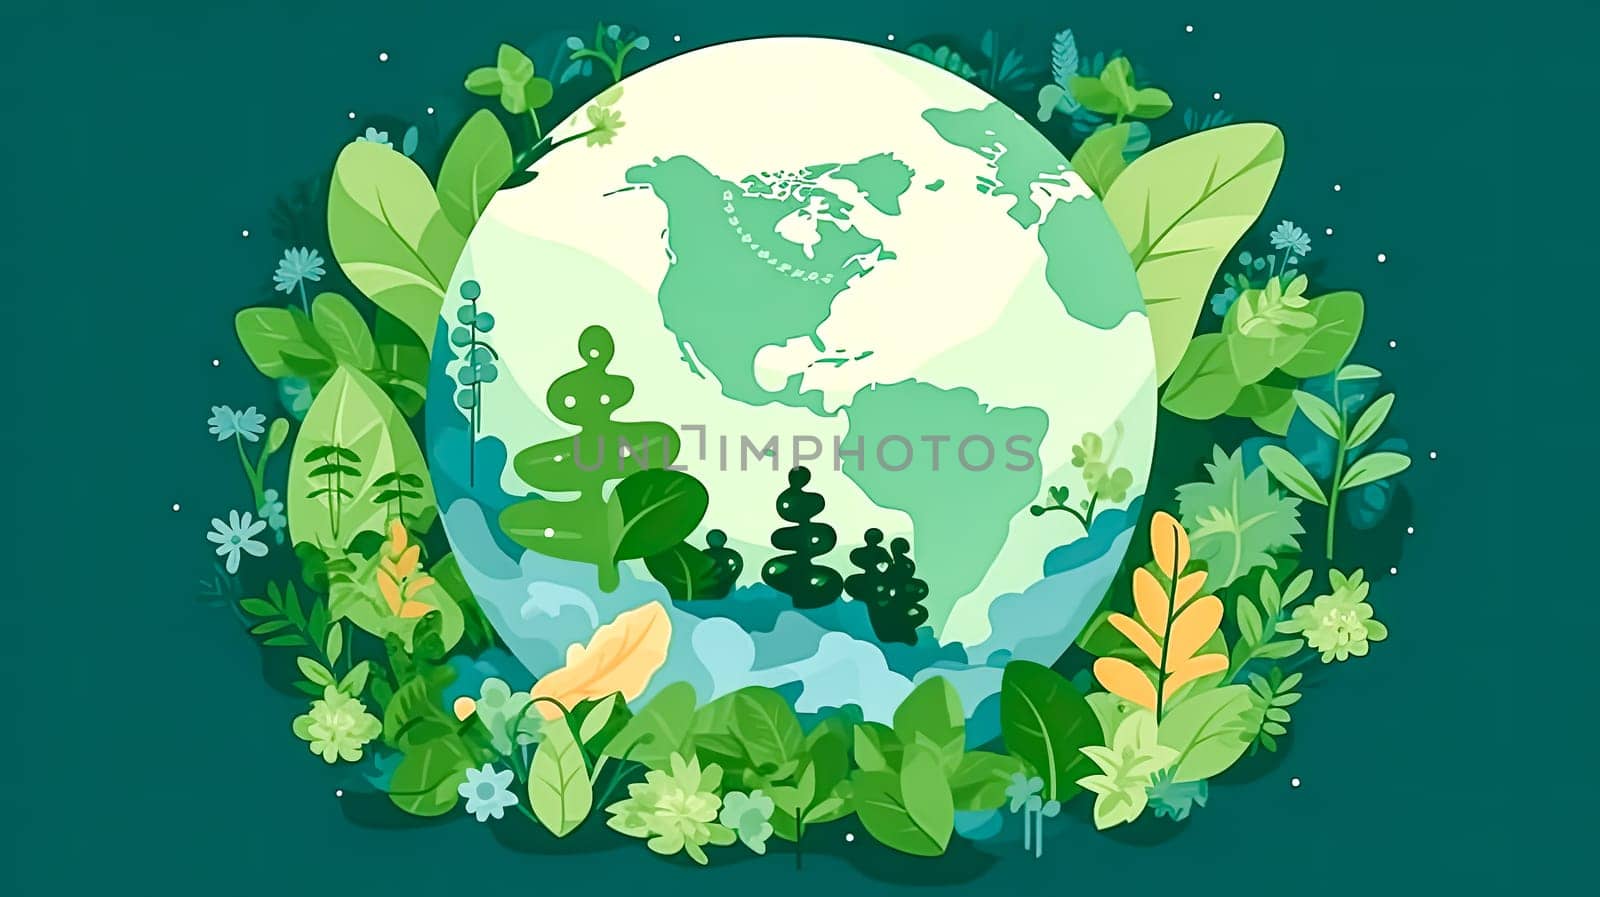 A planet in bloom, Earth adorned with green landscapes and lush trees by Alla_Morozova93